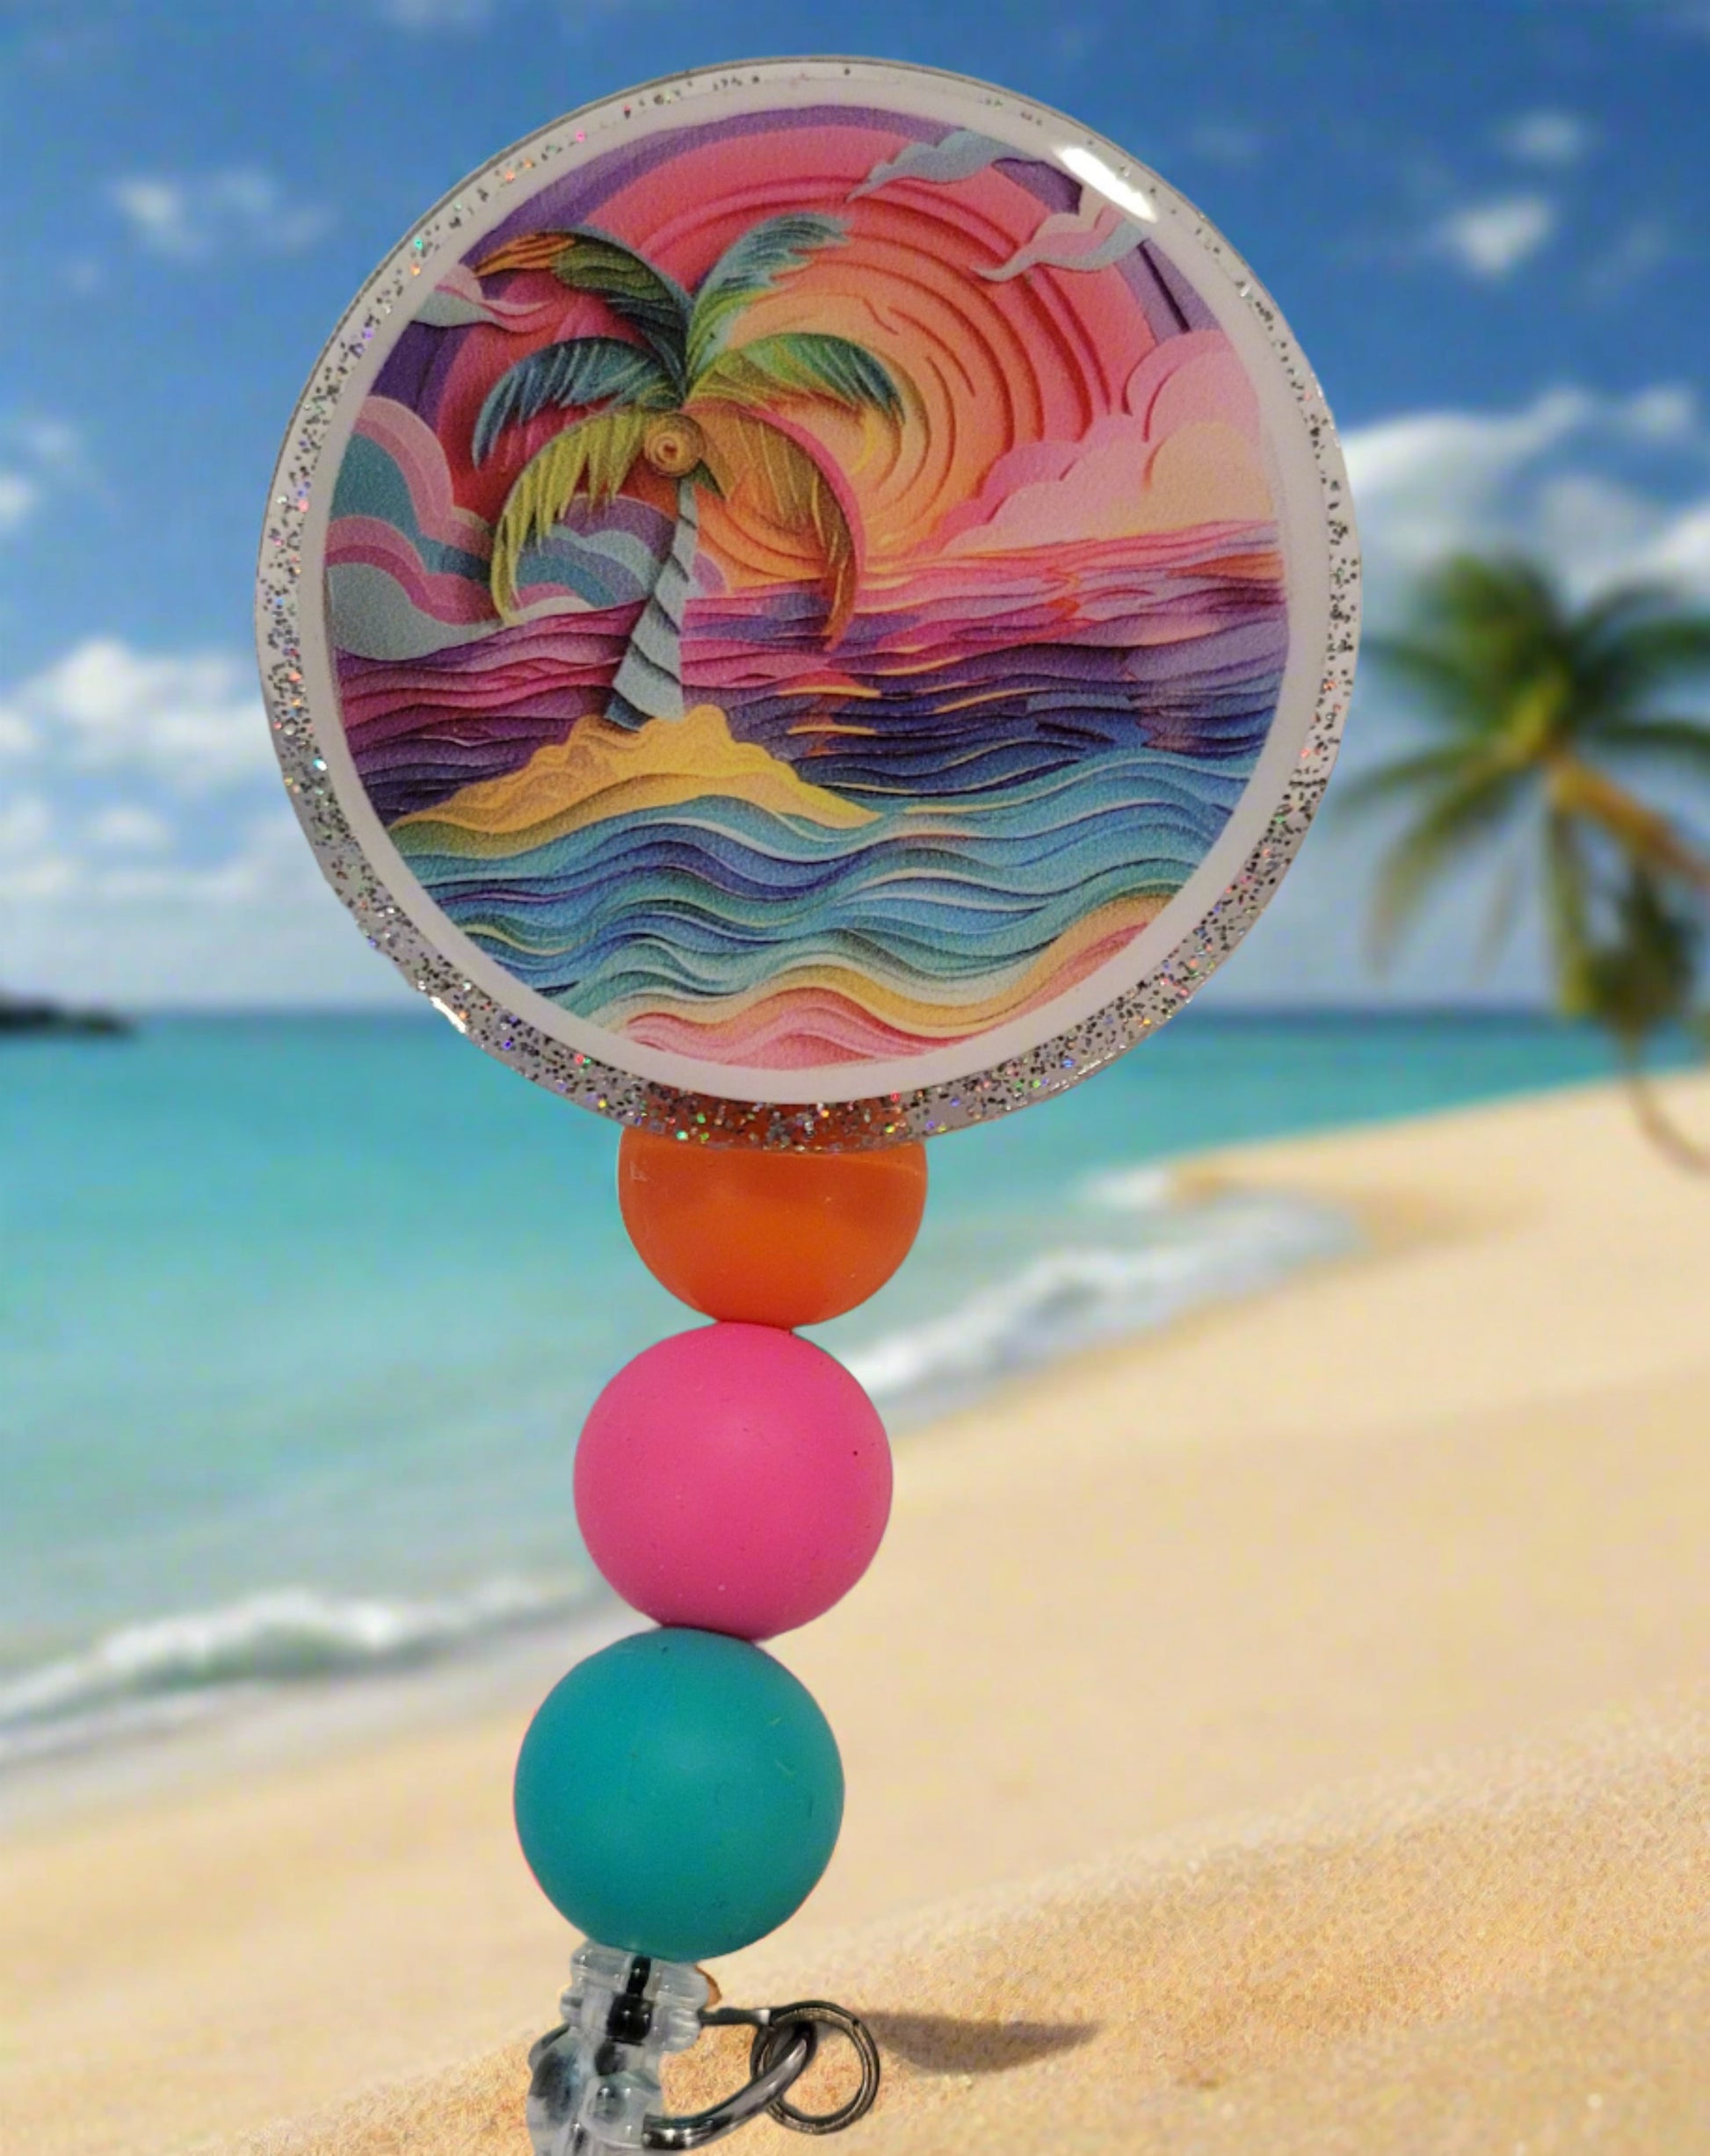 This acrylic badge features a unique, abstract design inspired by a deserted tropical island. It showcases a full range of vibrant, rainbow-like colors and is accented with a glitter back and three silicone beads in coordinating hues. It's sure to catch the eye.